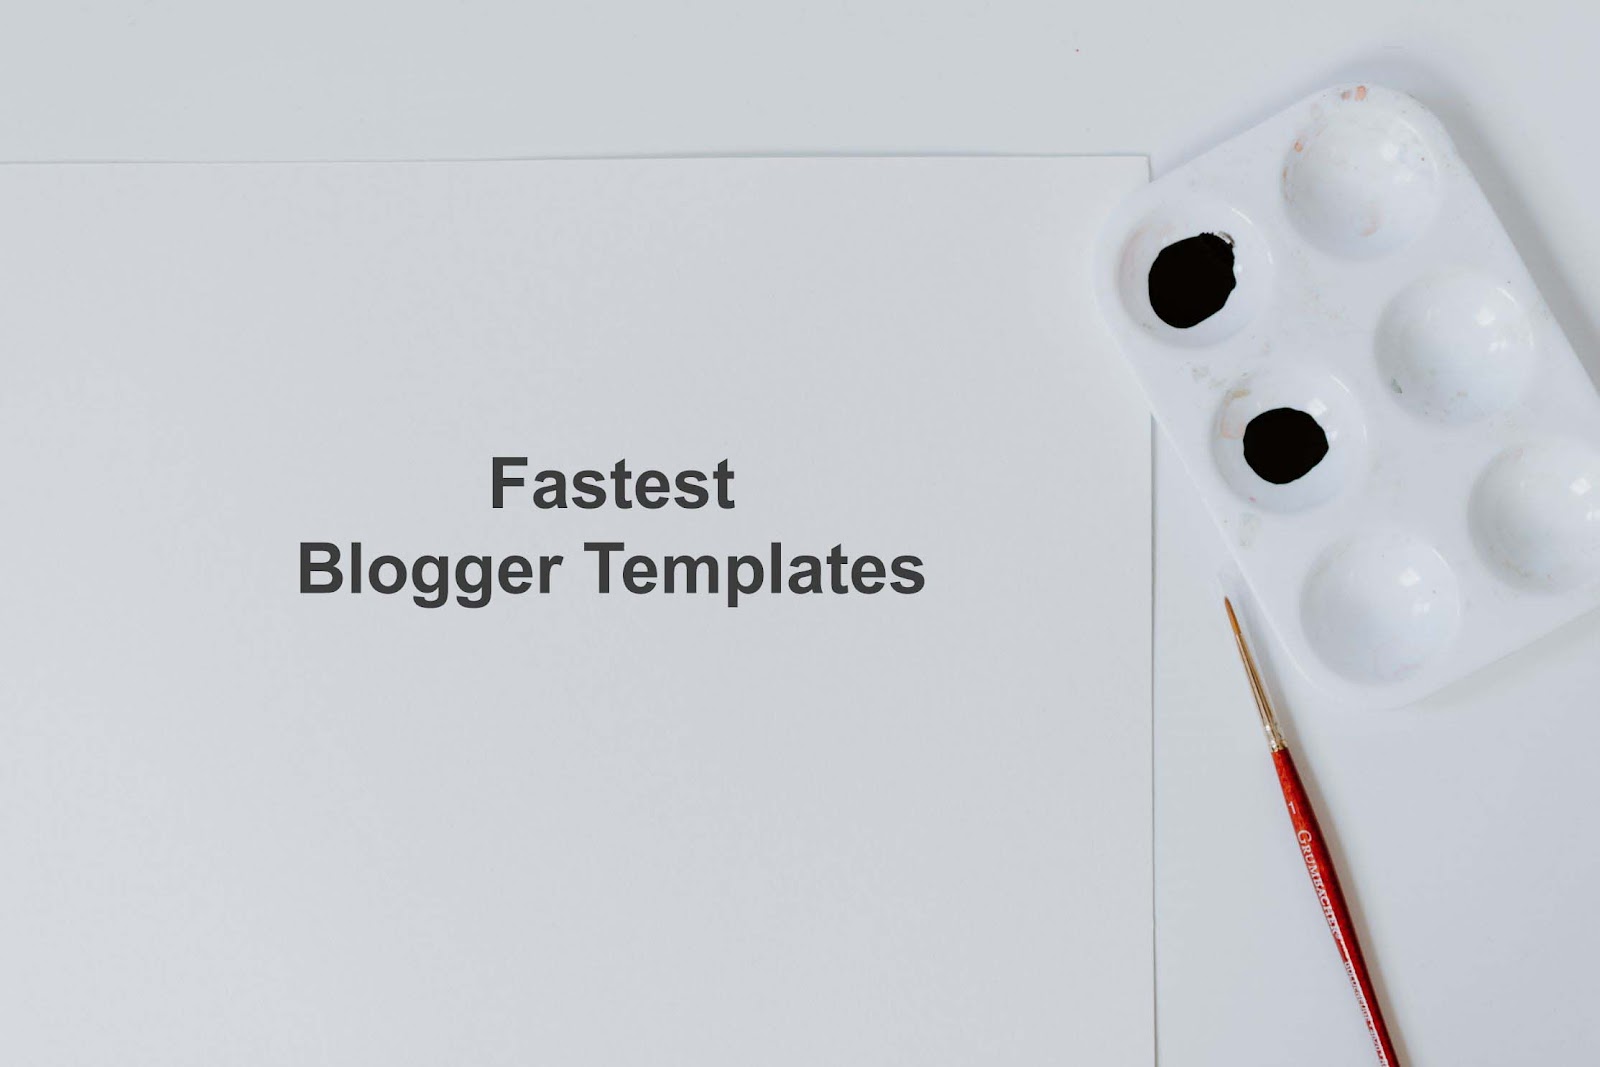 Top Fastest Blogger Templates